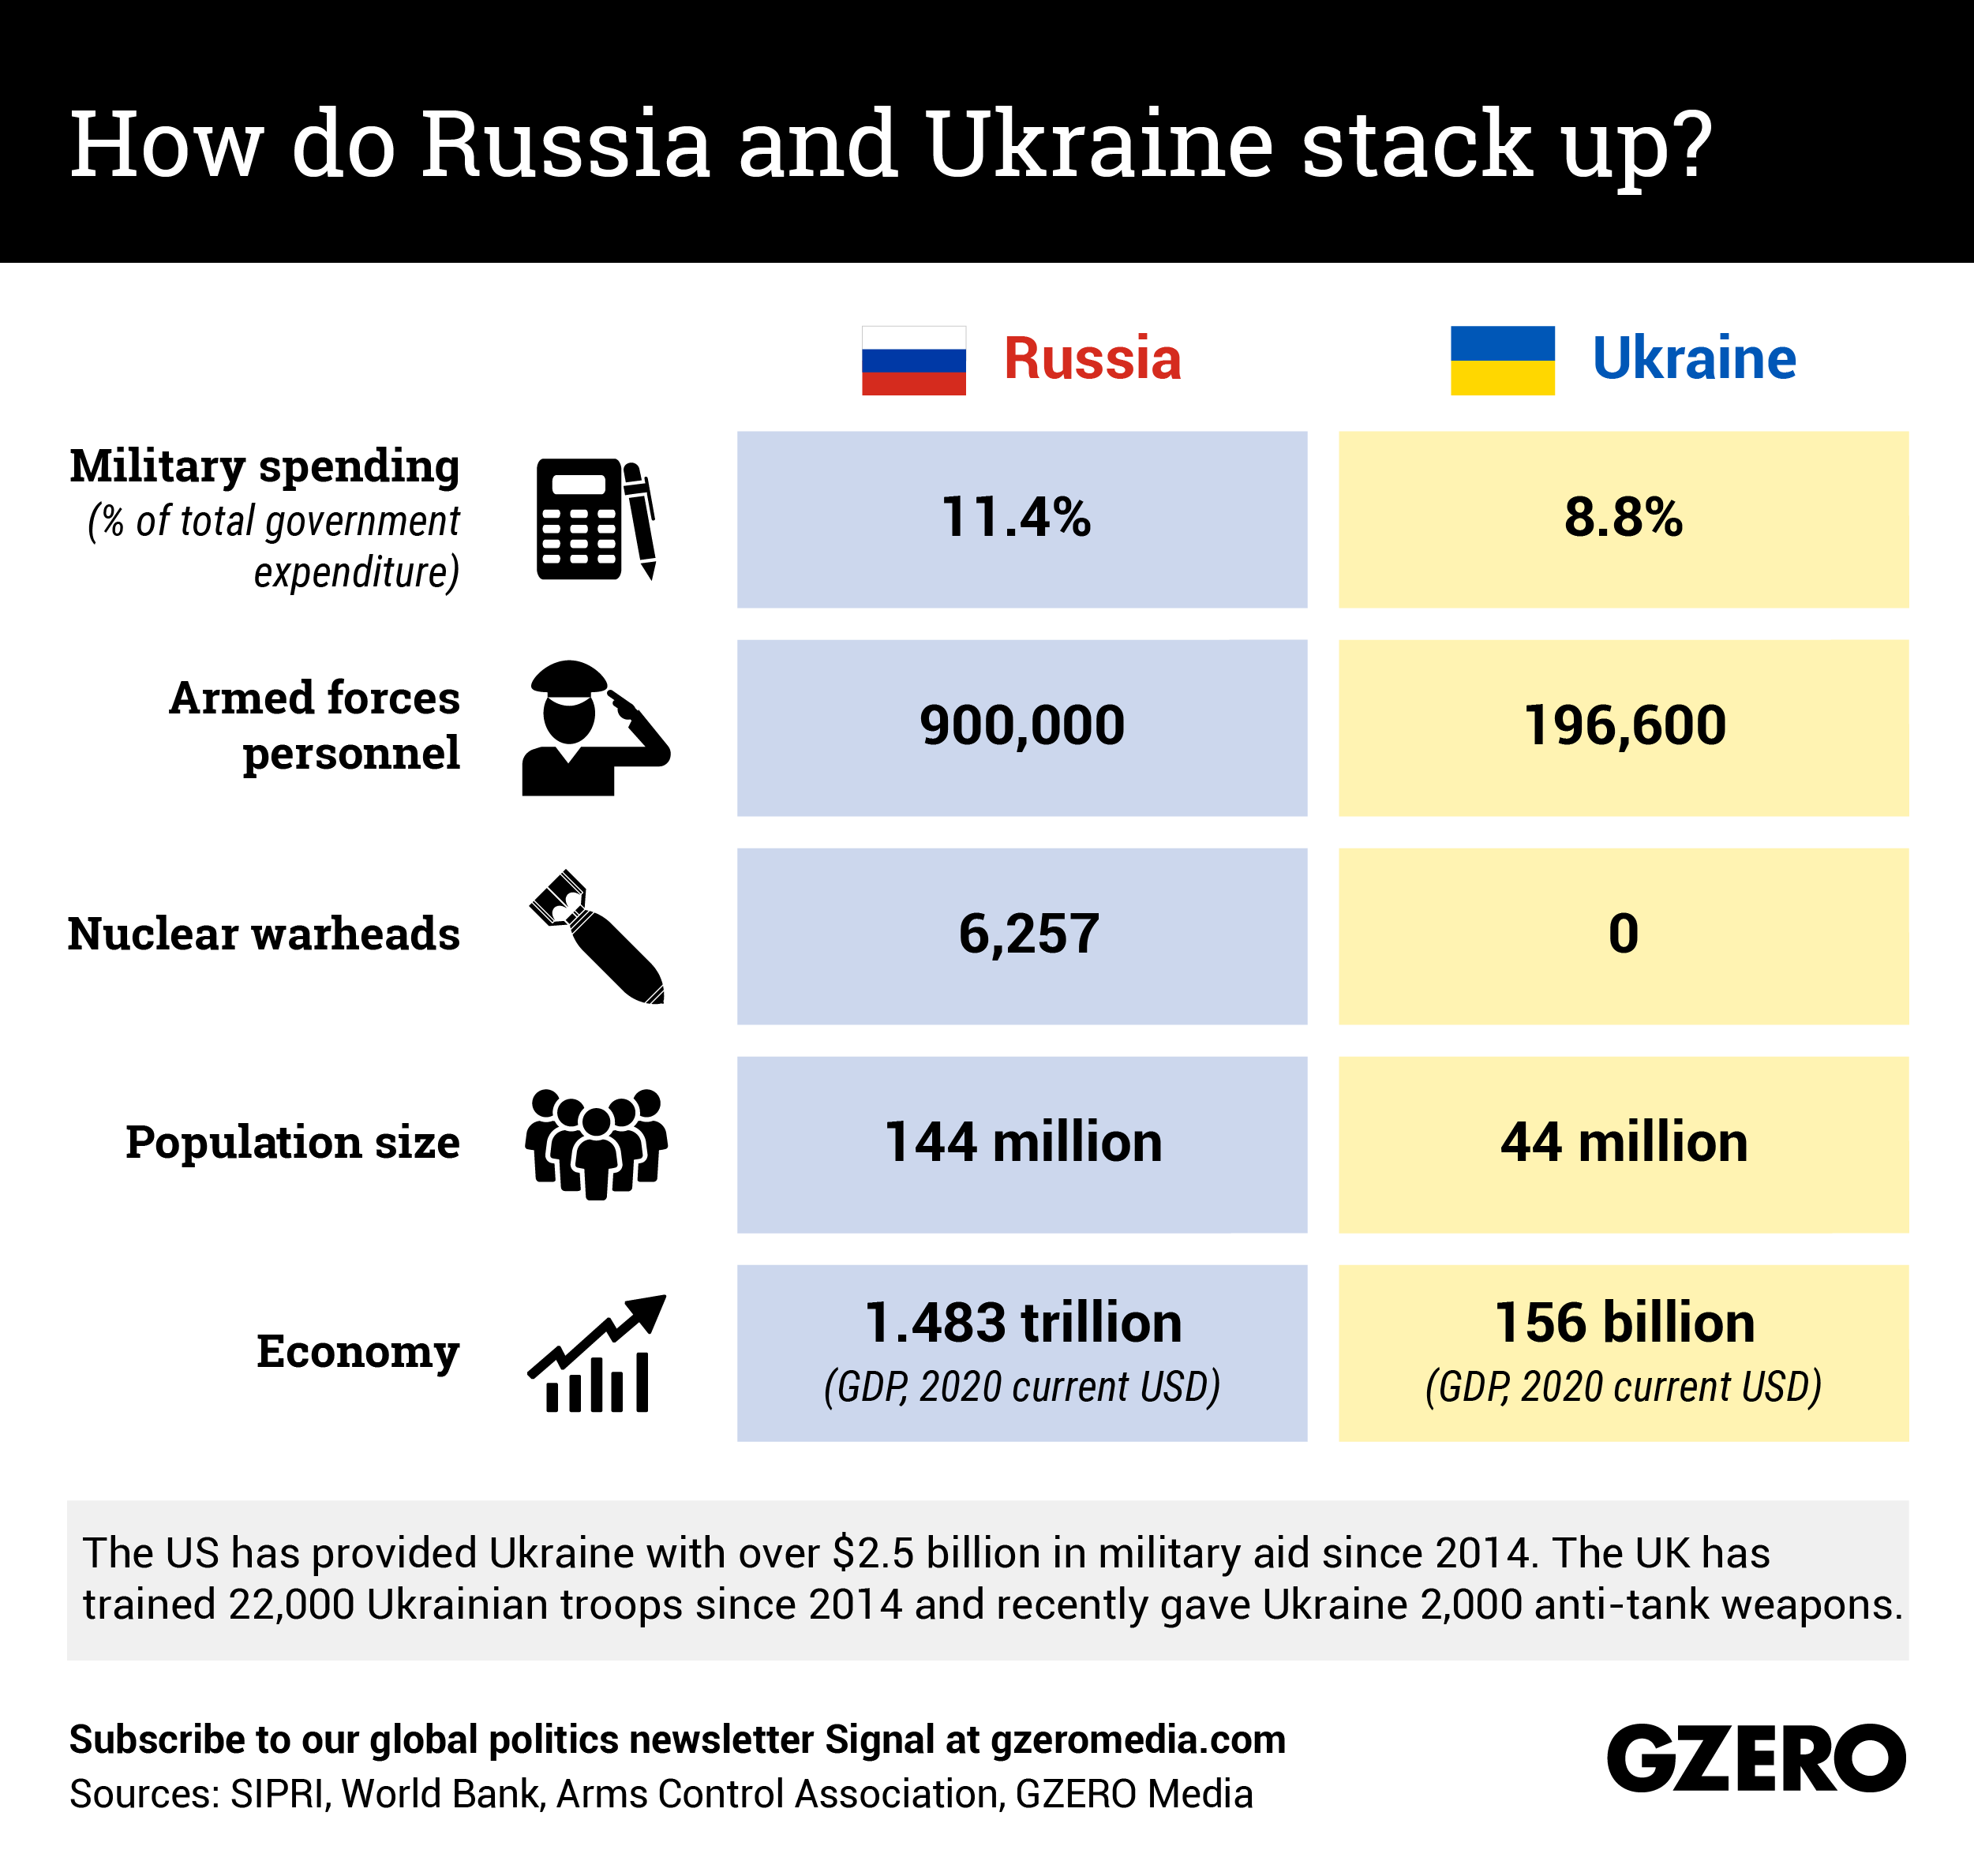 The Graphic Truth: How do Russia and Ukraine stack up?